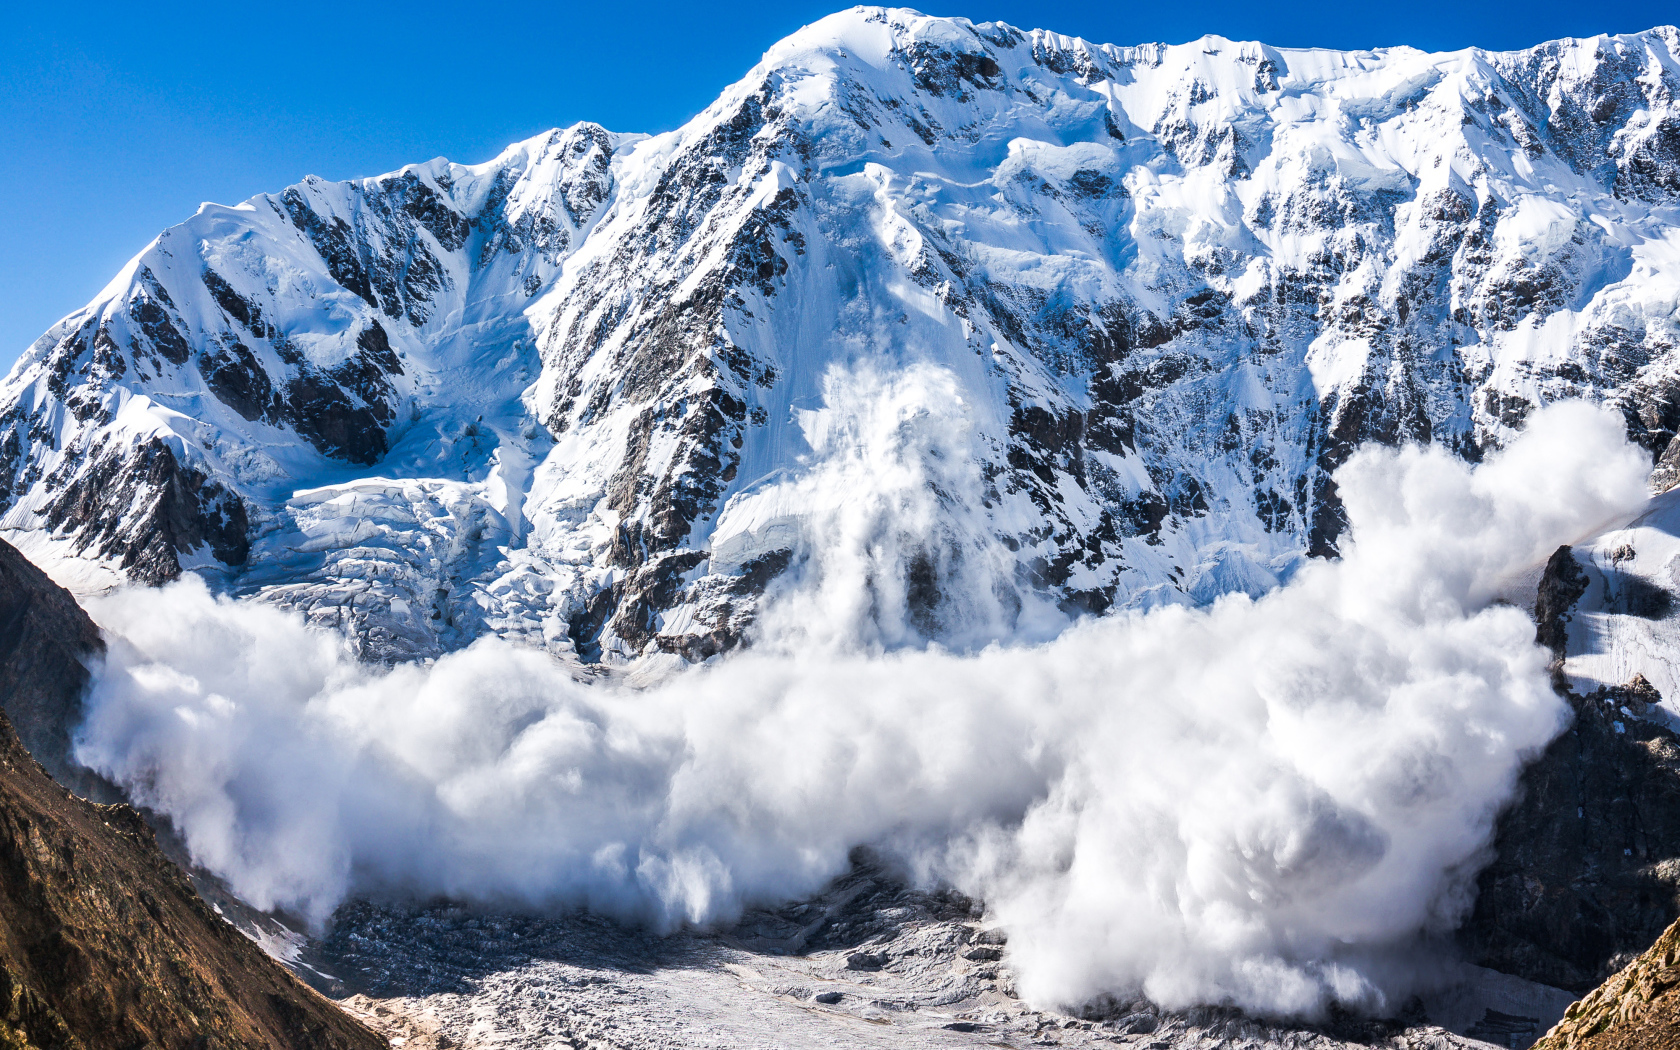 A large white avalanche descends from the snowy Alps